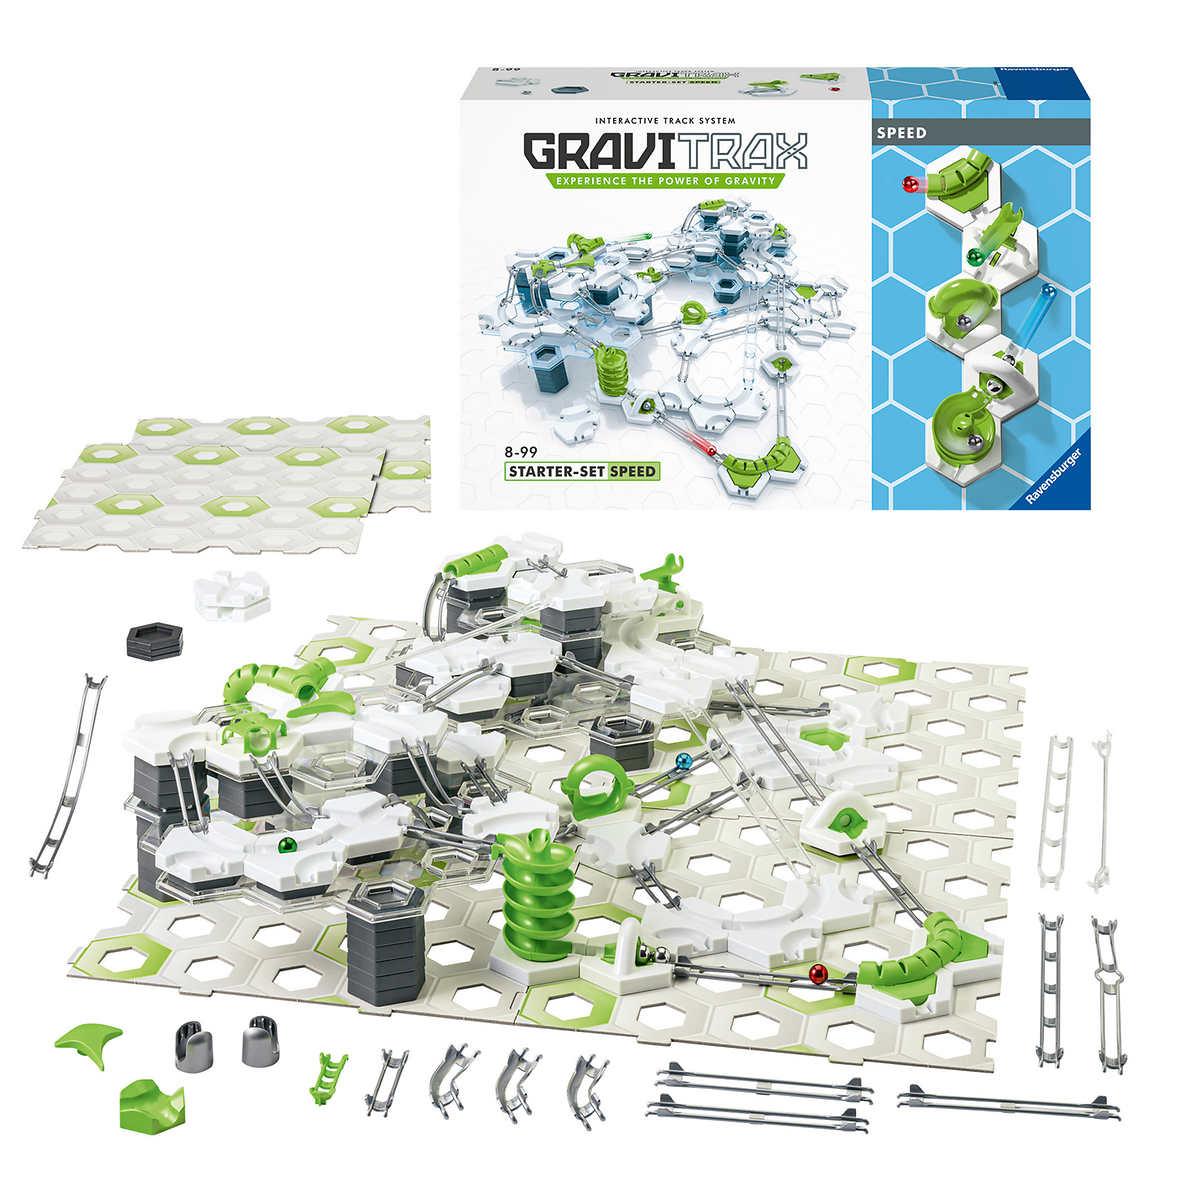 Ravensburger Gravitrax Obstacle Course Set – The Puzzle Collections